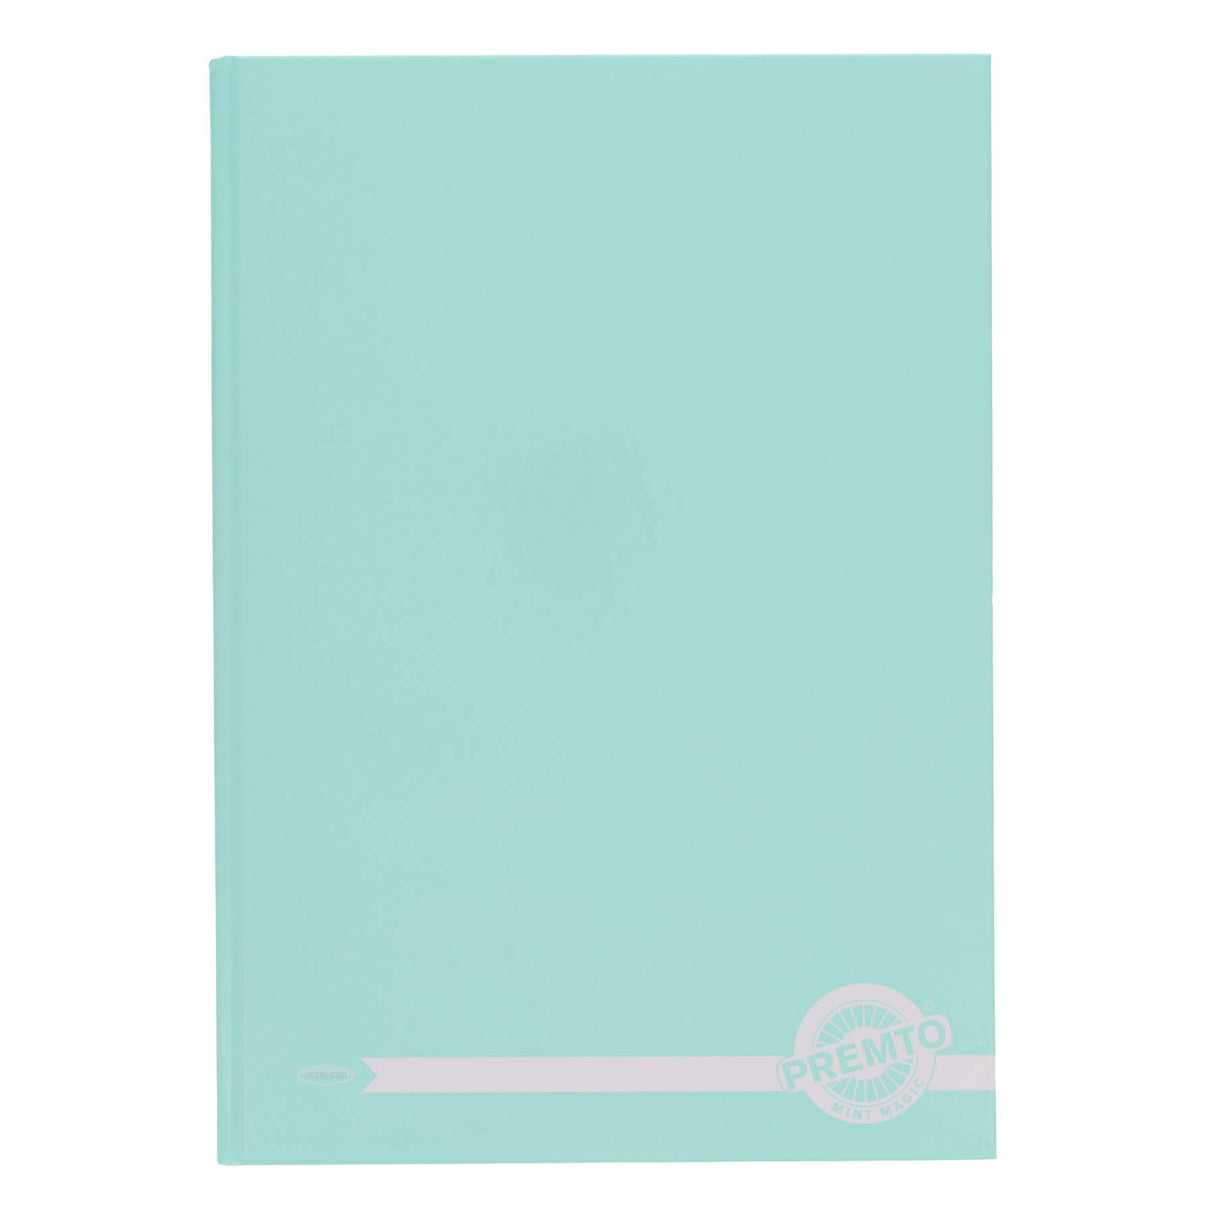 Premto Pastel Multipack | A4 Hardcover Notebook - 160 Pages - Pack of 5-A4 Notebooks-Premto|StationeryShop.co.uk